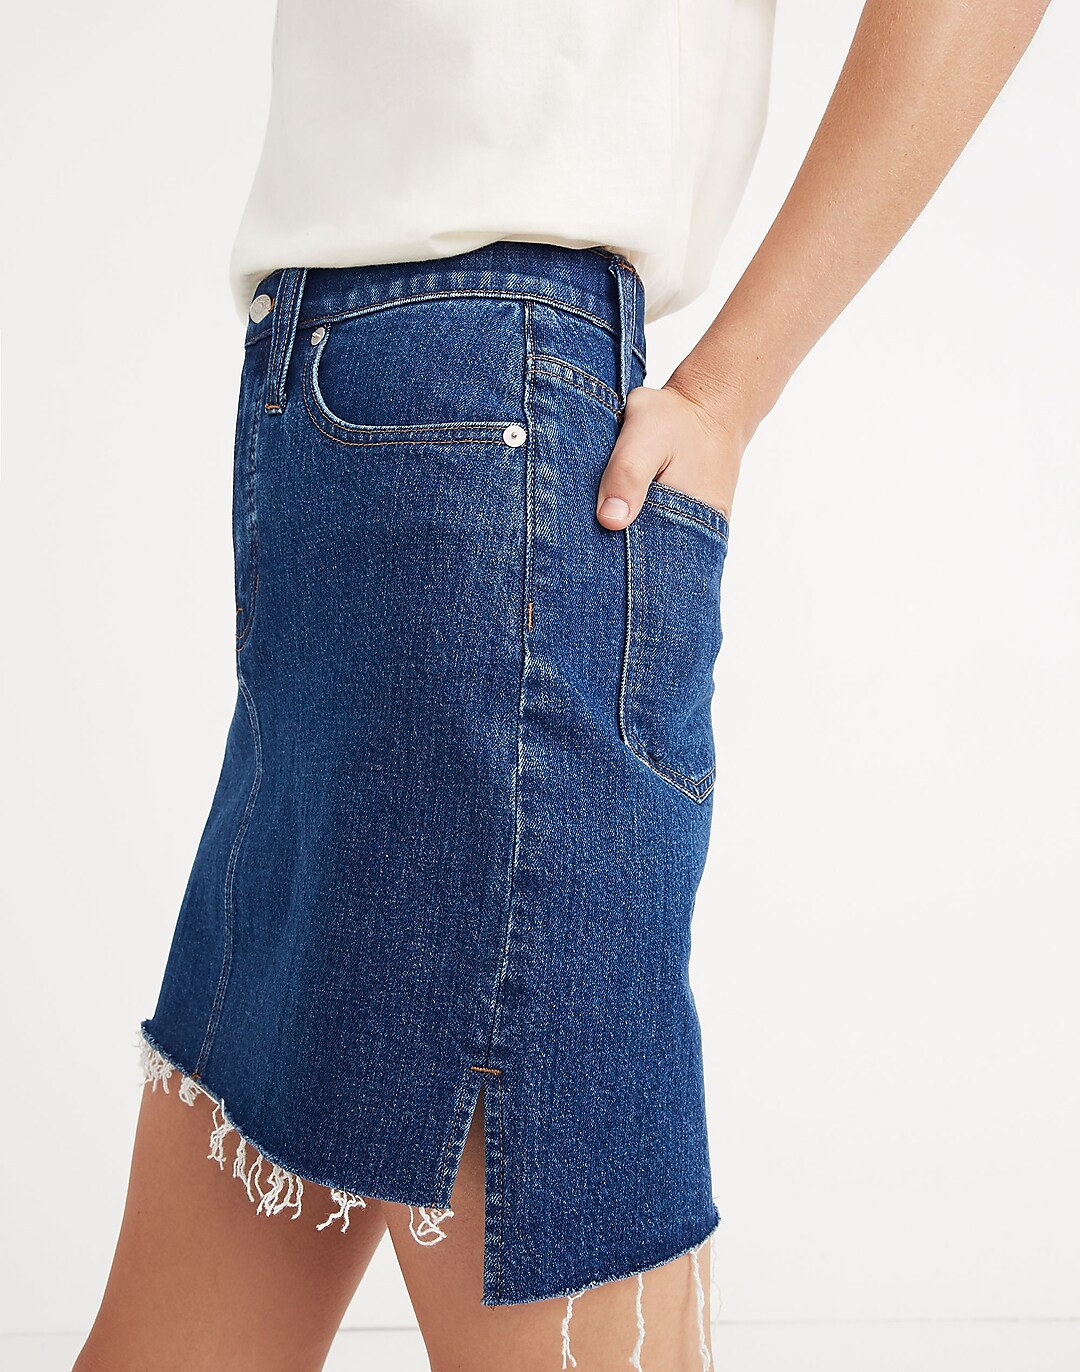 This $25 Denim Mini Skirt From  Is Stretchy and Flattering